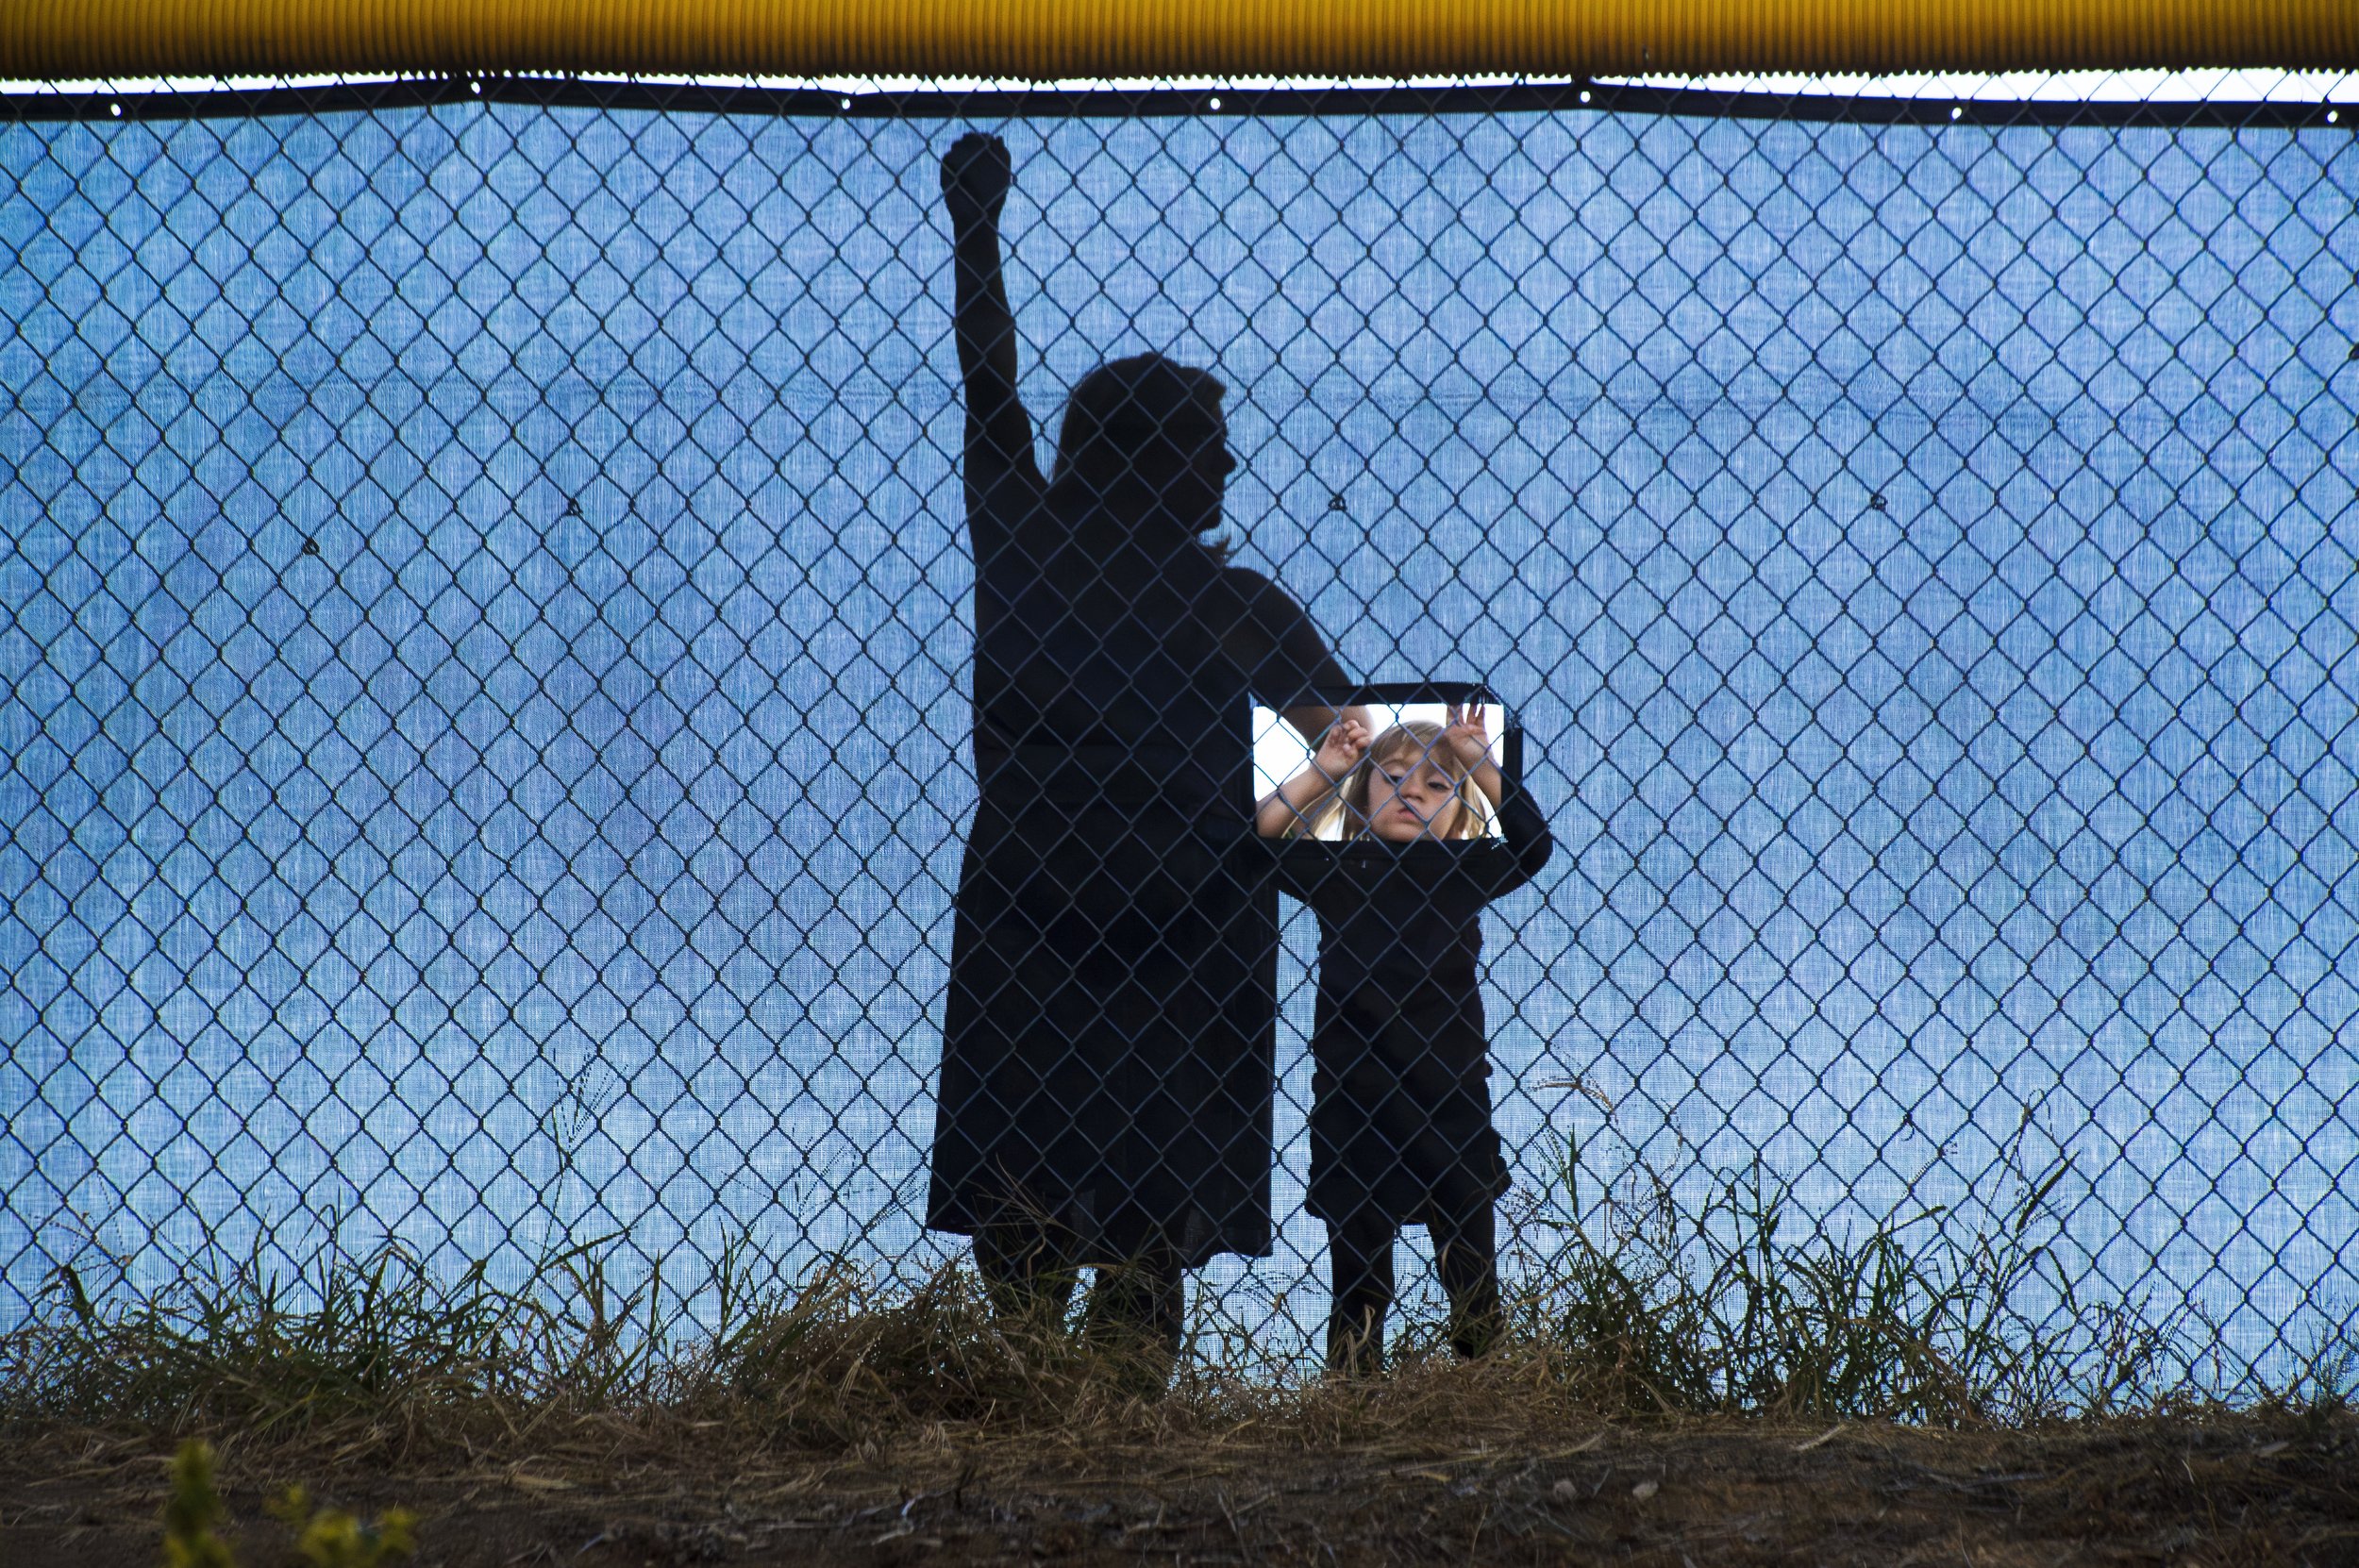  Mindy Mohlenbrok, left, waits as her daughter Kendall Mohlenbrok 3 peers through a hole in the fence to watch a high school football game  in Loomis, Calif. August 24, 2012. 